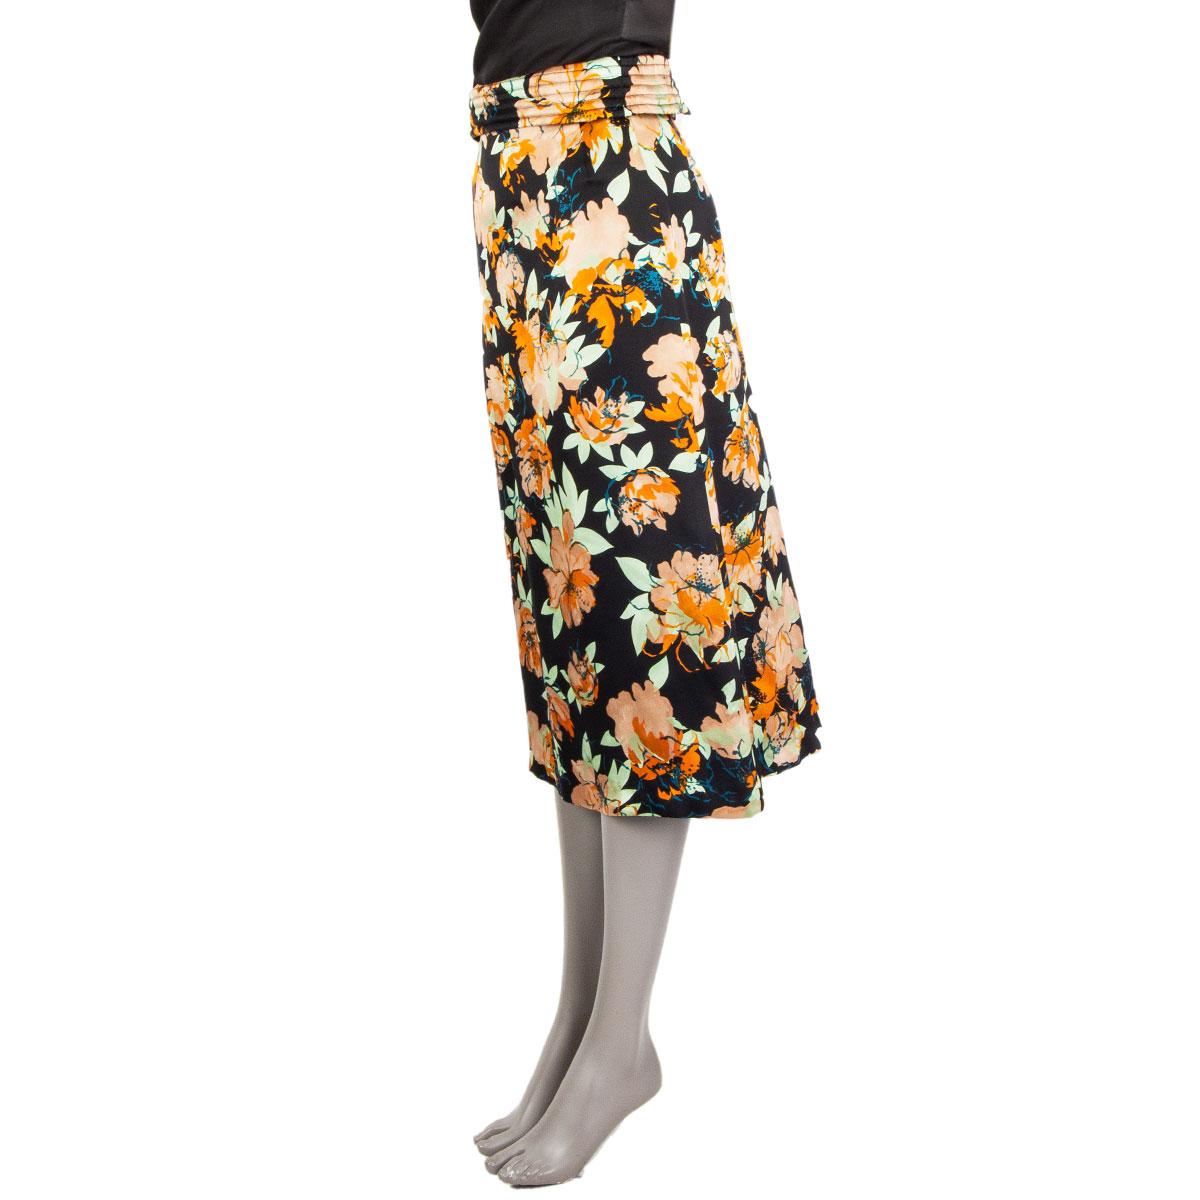 authentic Dries Van Noten floral print skirt in black, pantone, sage and nude silk (100%) with a stitched high waist, and a flared A-line. Lined in black silk (100%). Closes with a hook & bar and a concealed zipper in the back. Has been worn an is